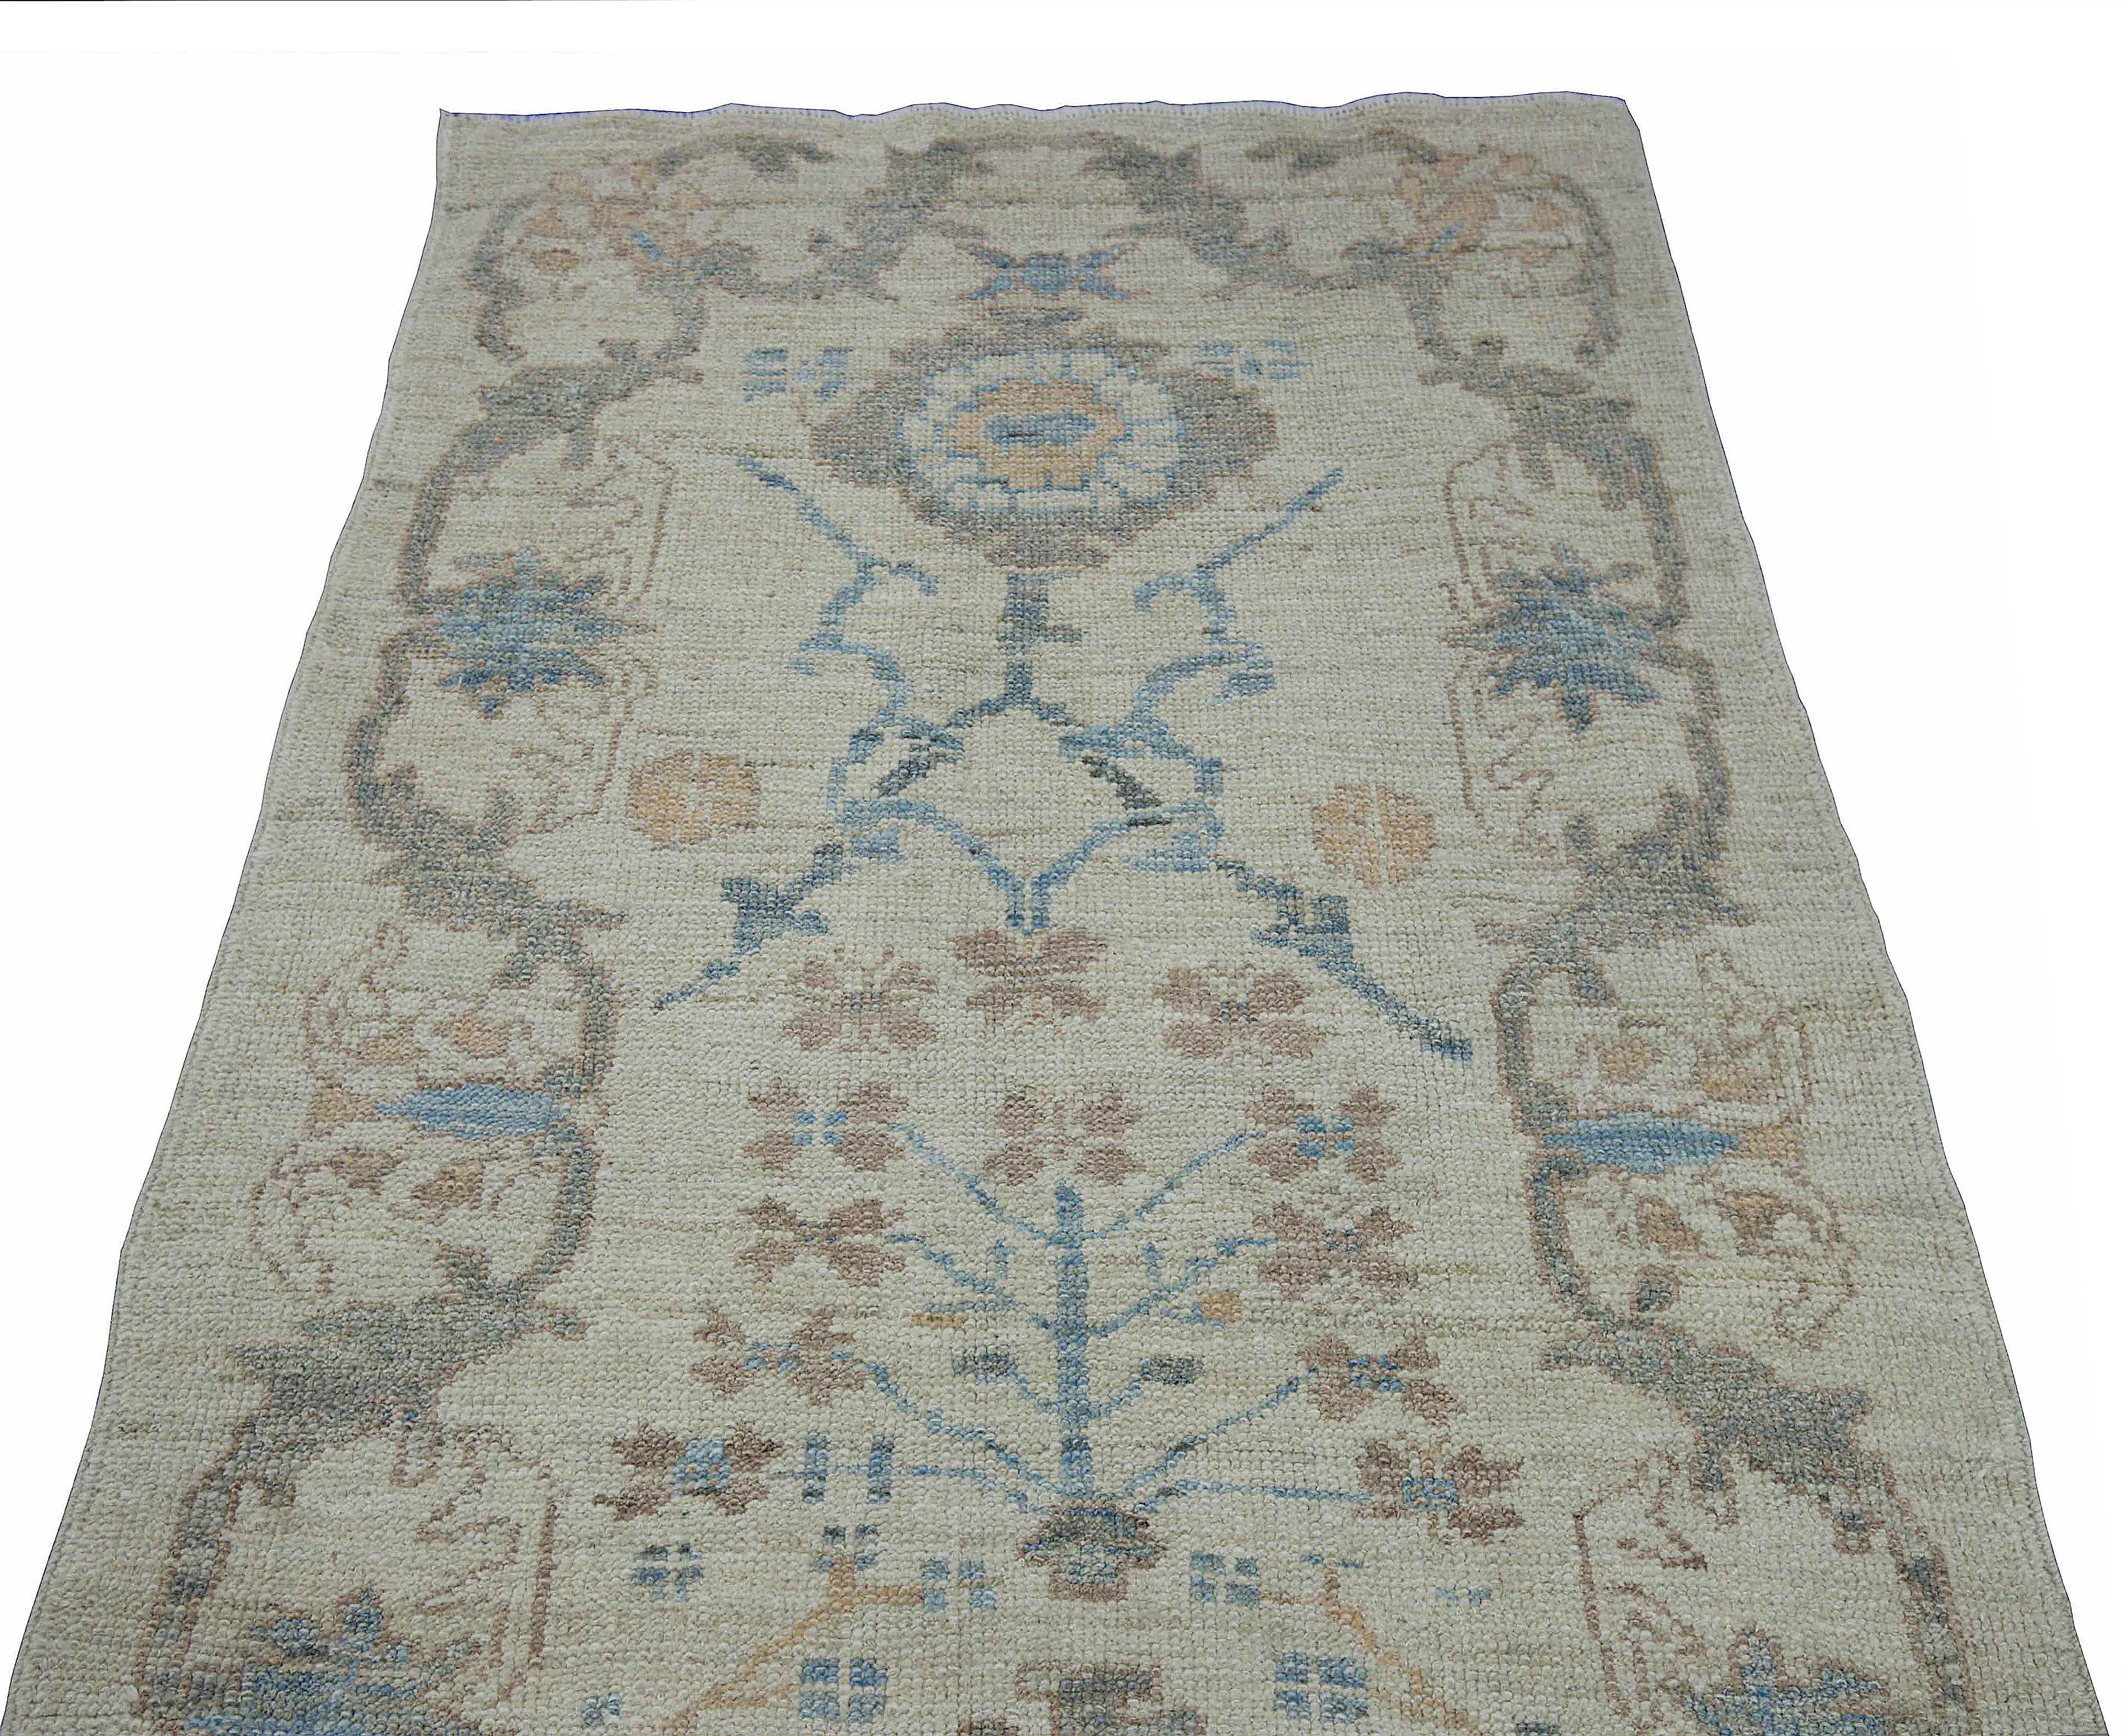 Contemporary Ivory Oushak Rug with Floral Motifs in Gray, Brown, and Blue In New Condition For Sale In Dallas, TX